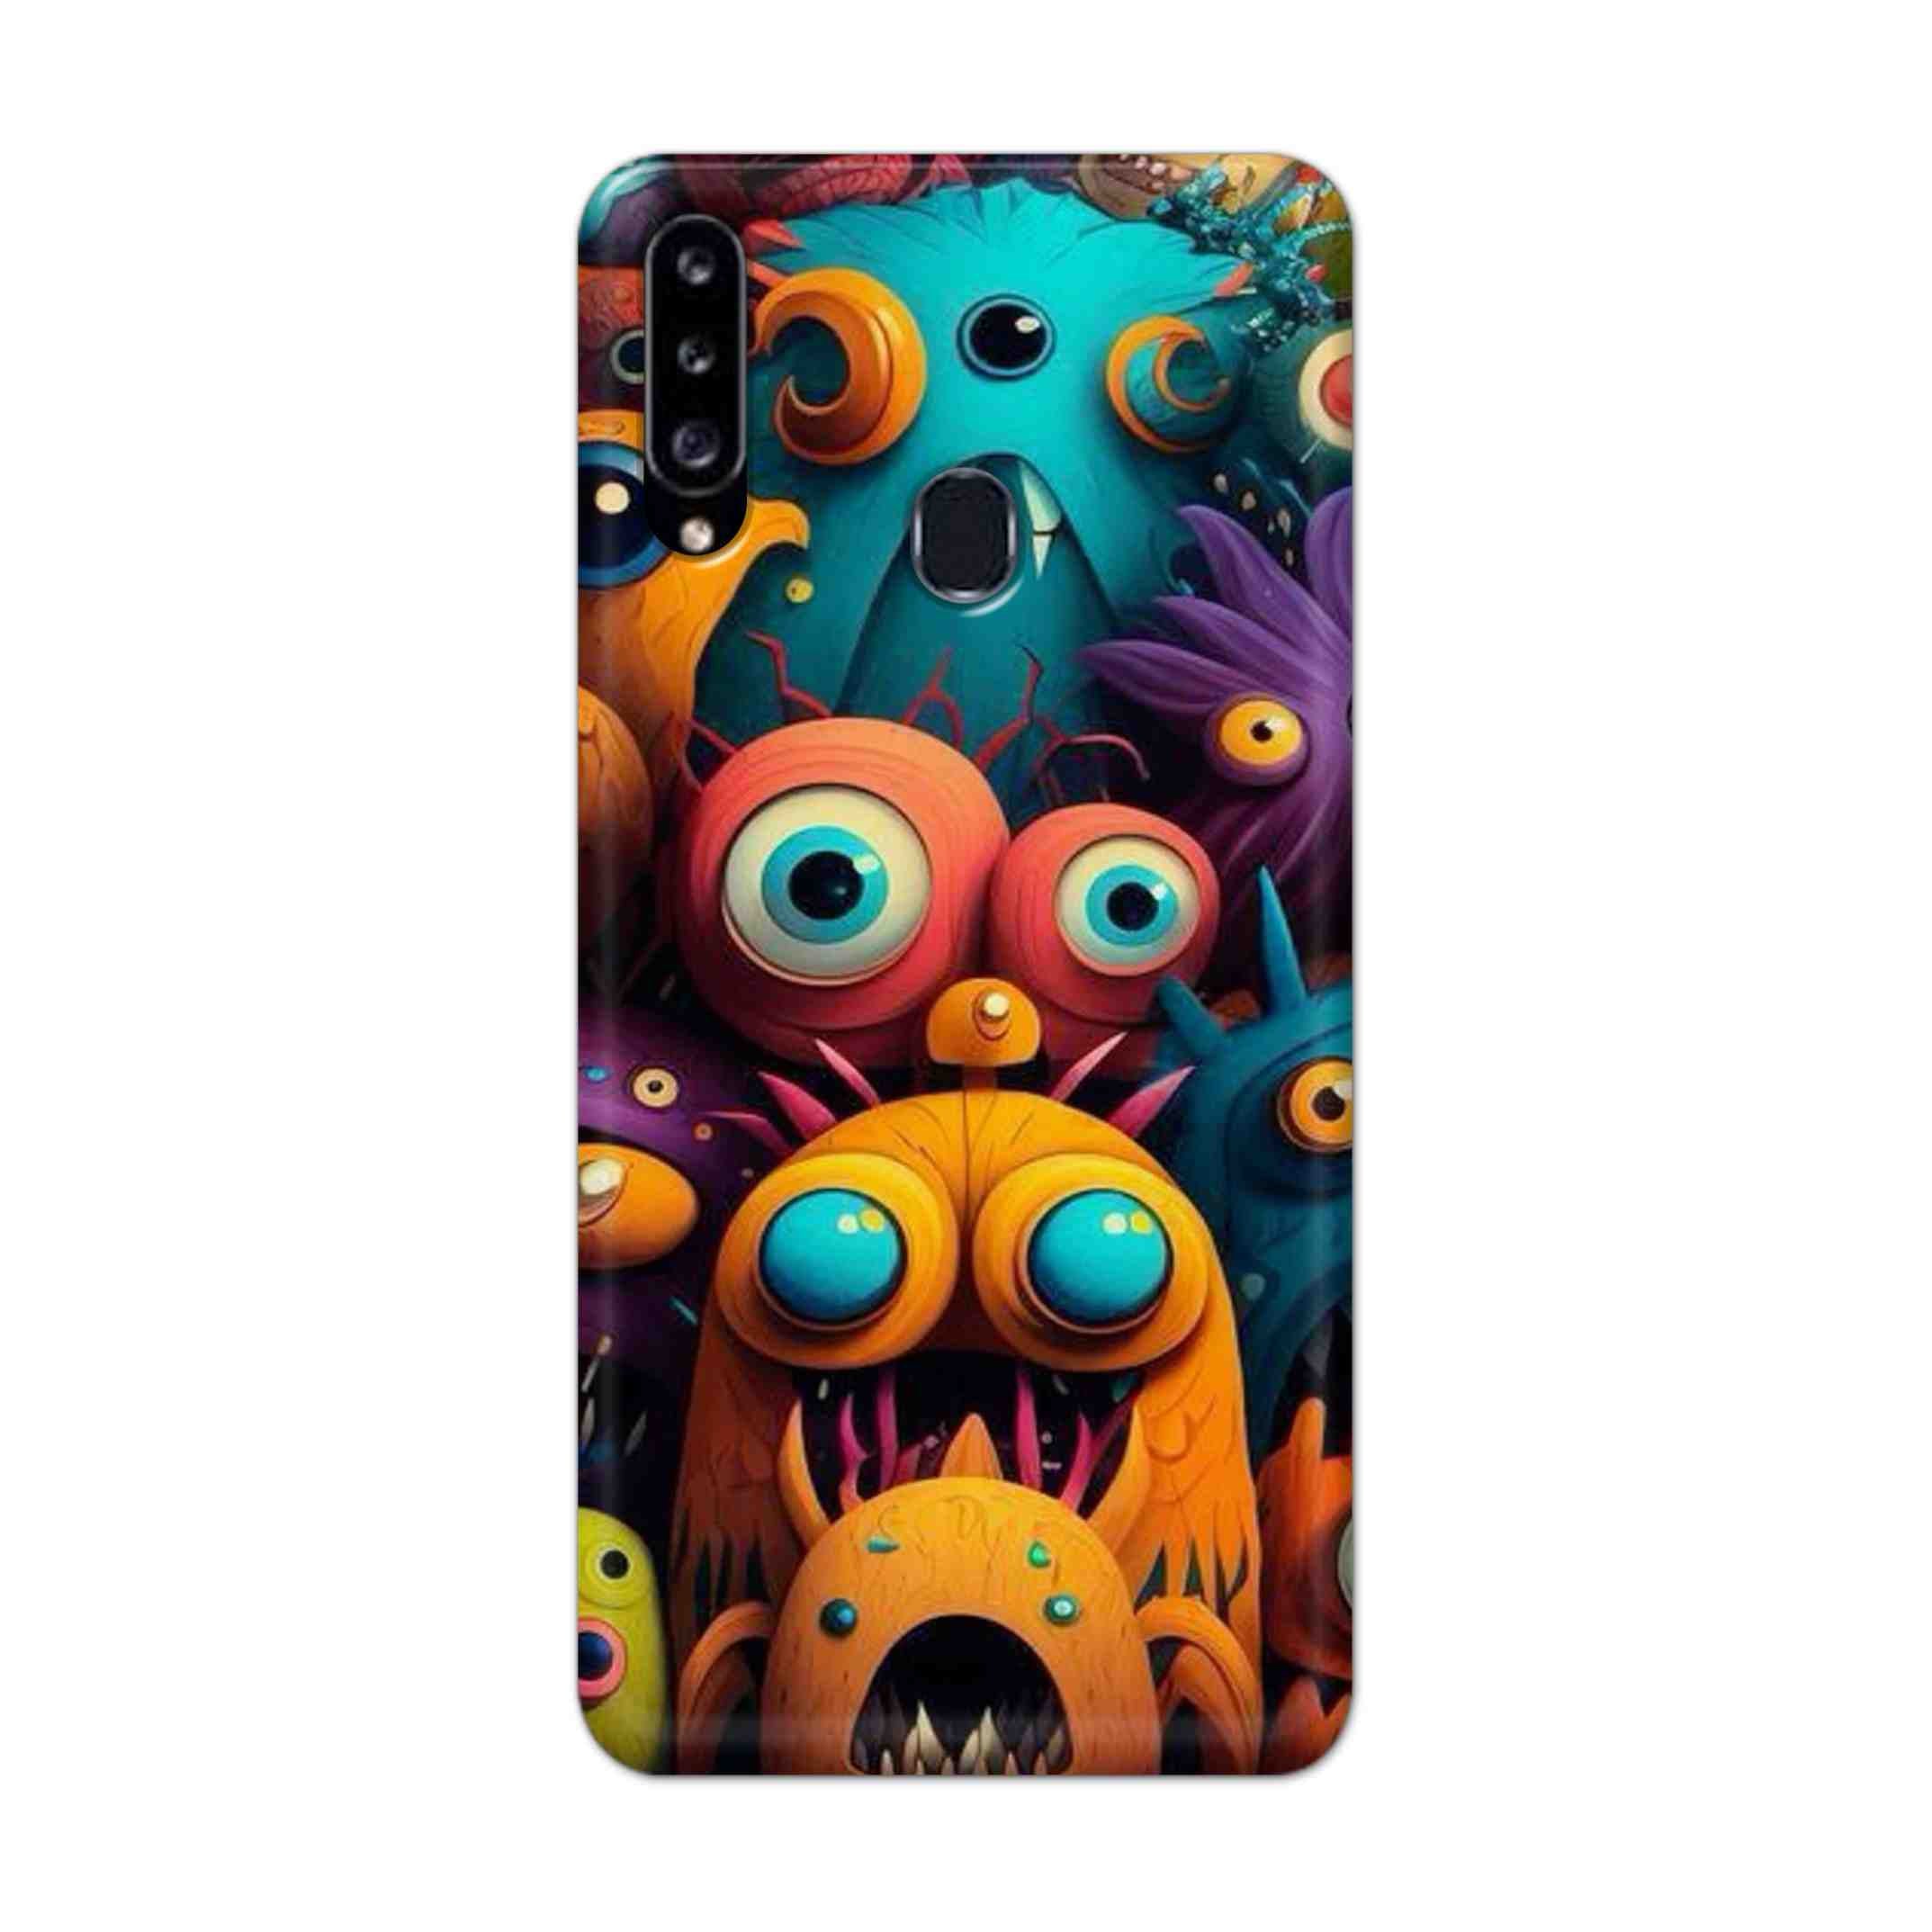 Buy Zombie Hard Back Mobile Phone Case Cover For Samsung Galaxy A21 Online